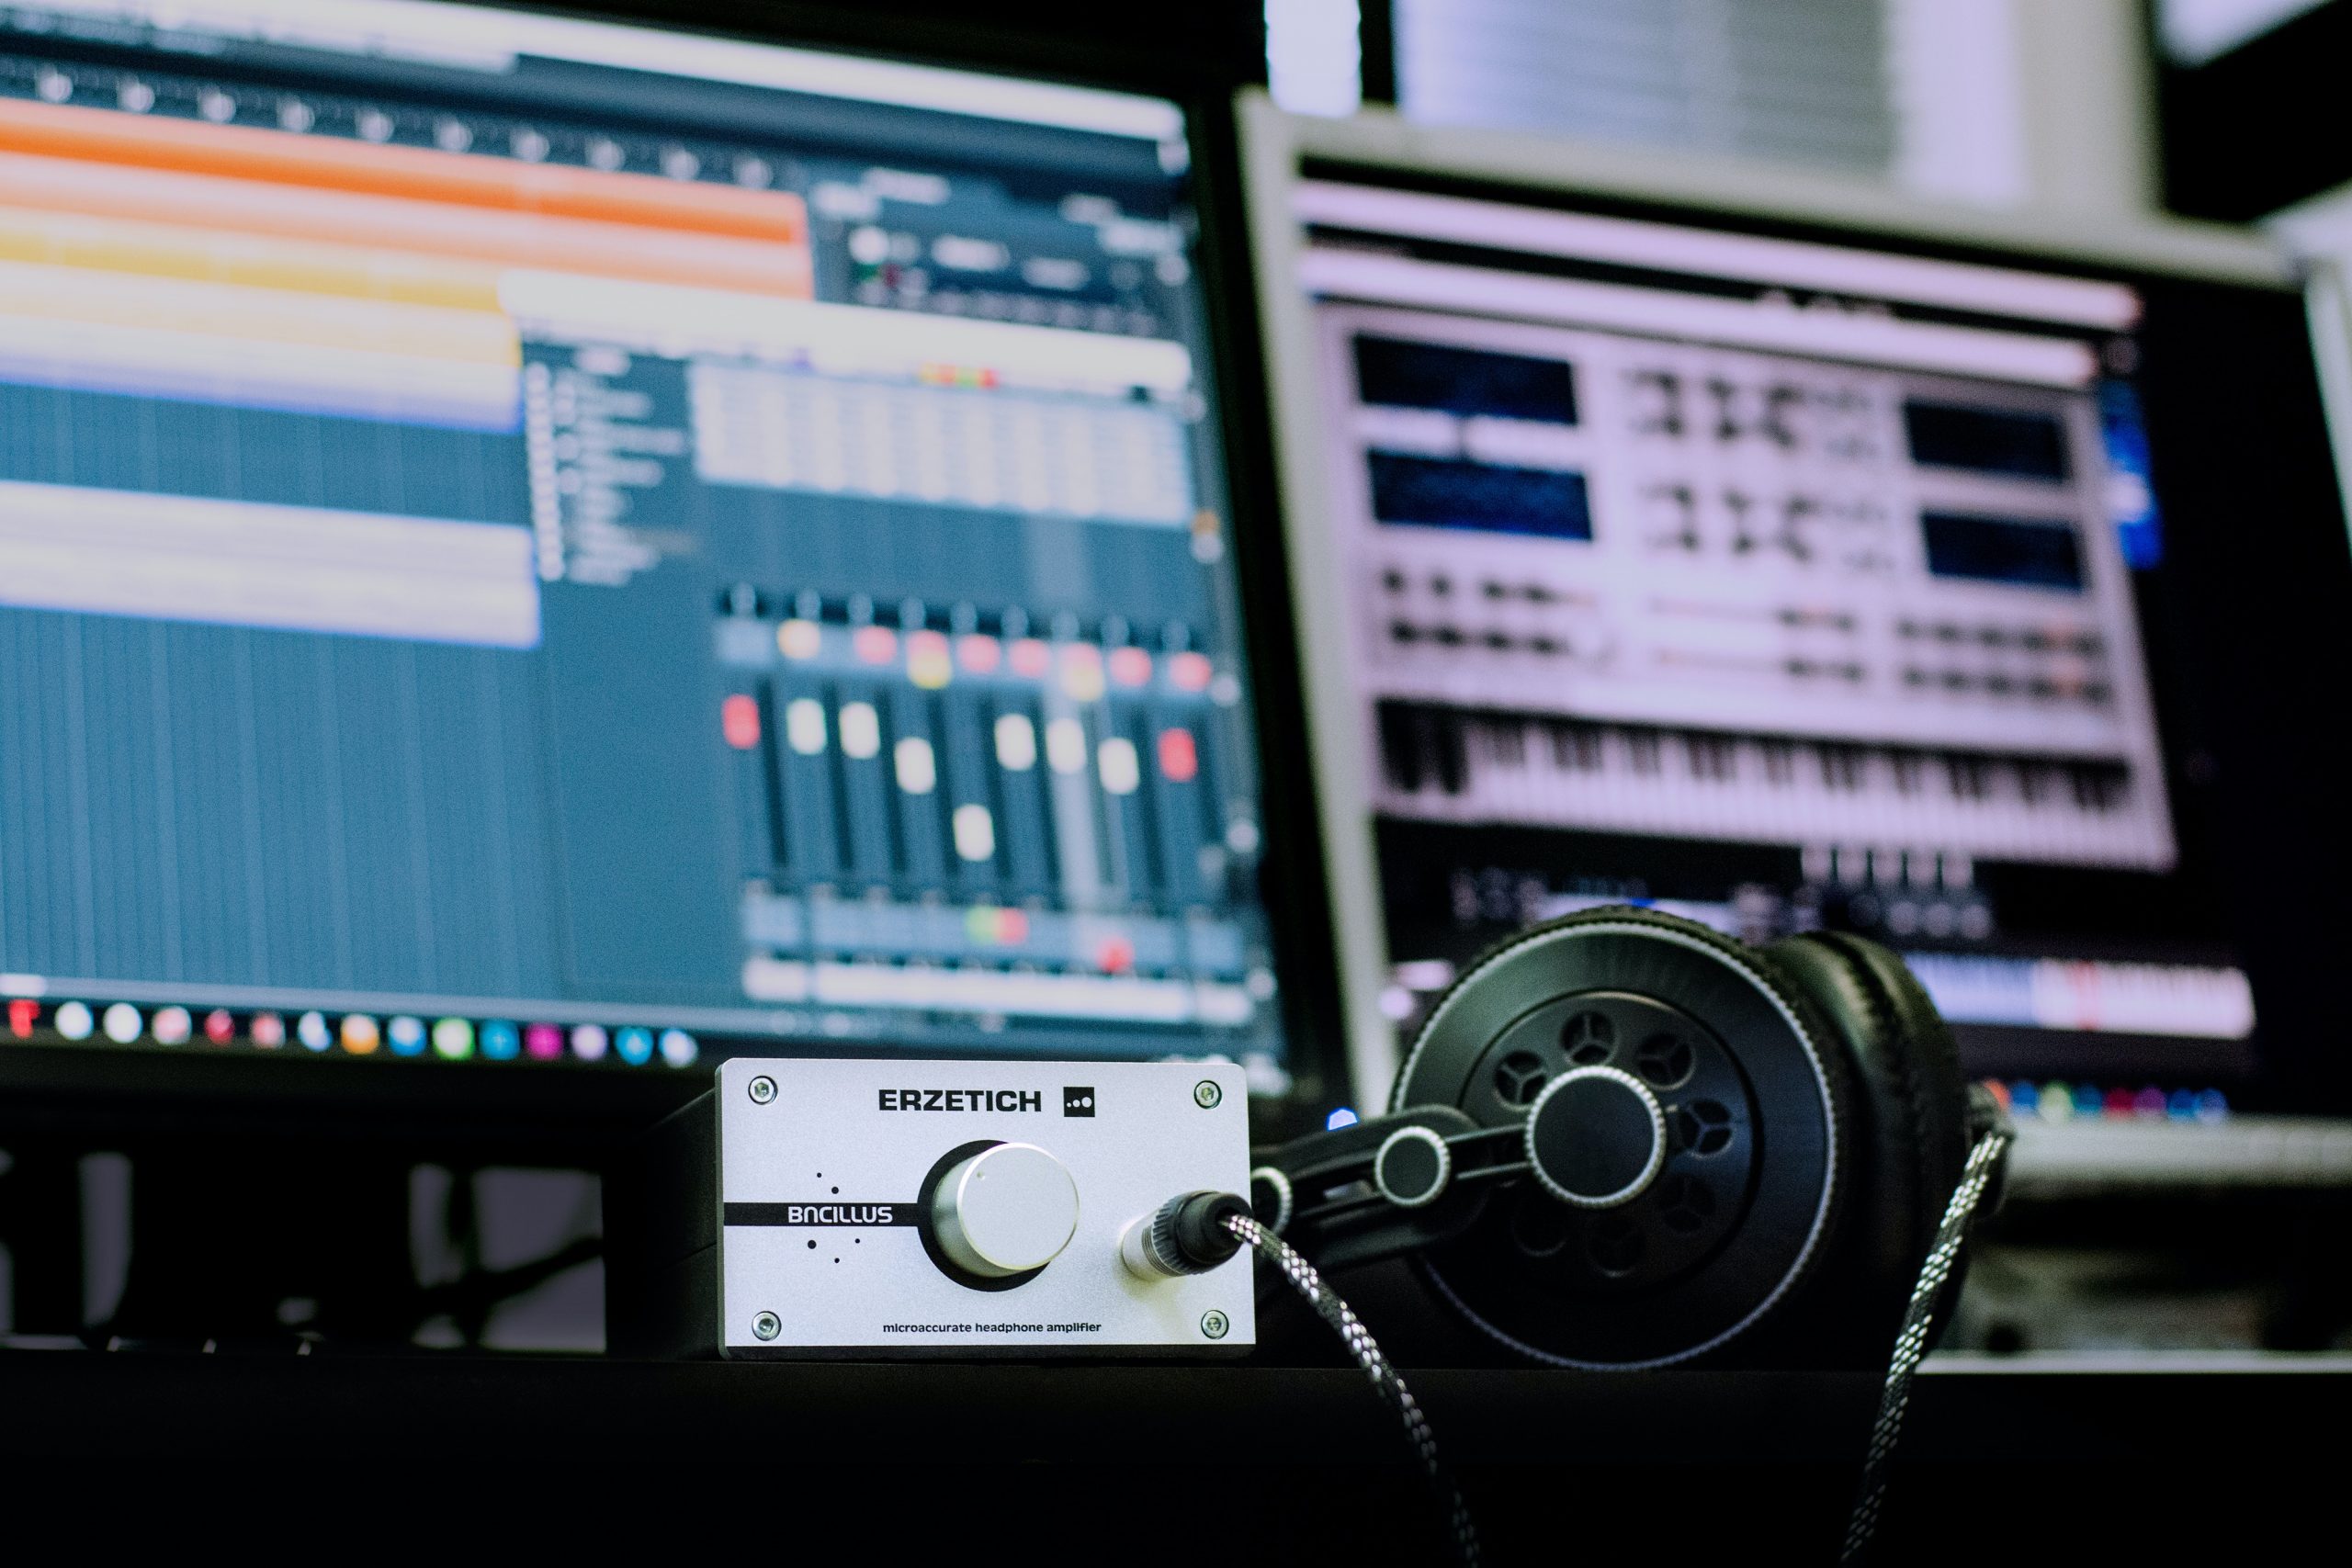 Increase Reporting Efficiency with Digital Logsheets
Photo by Blaz Erzetic: https://www.pexels.com/photo/photo-of-headphone-and-amplifier-2426085/